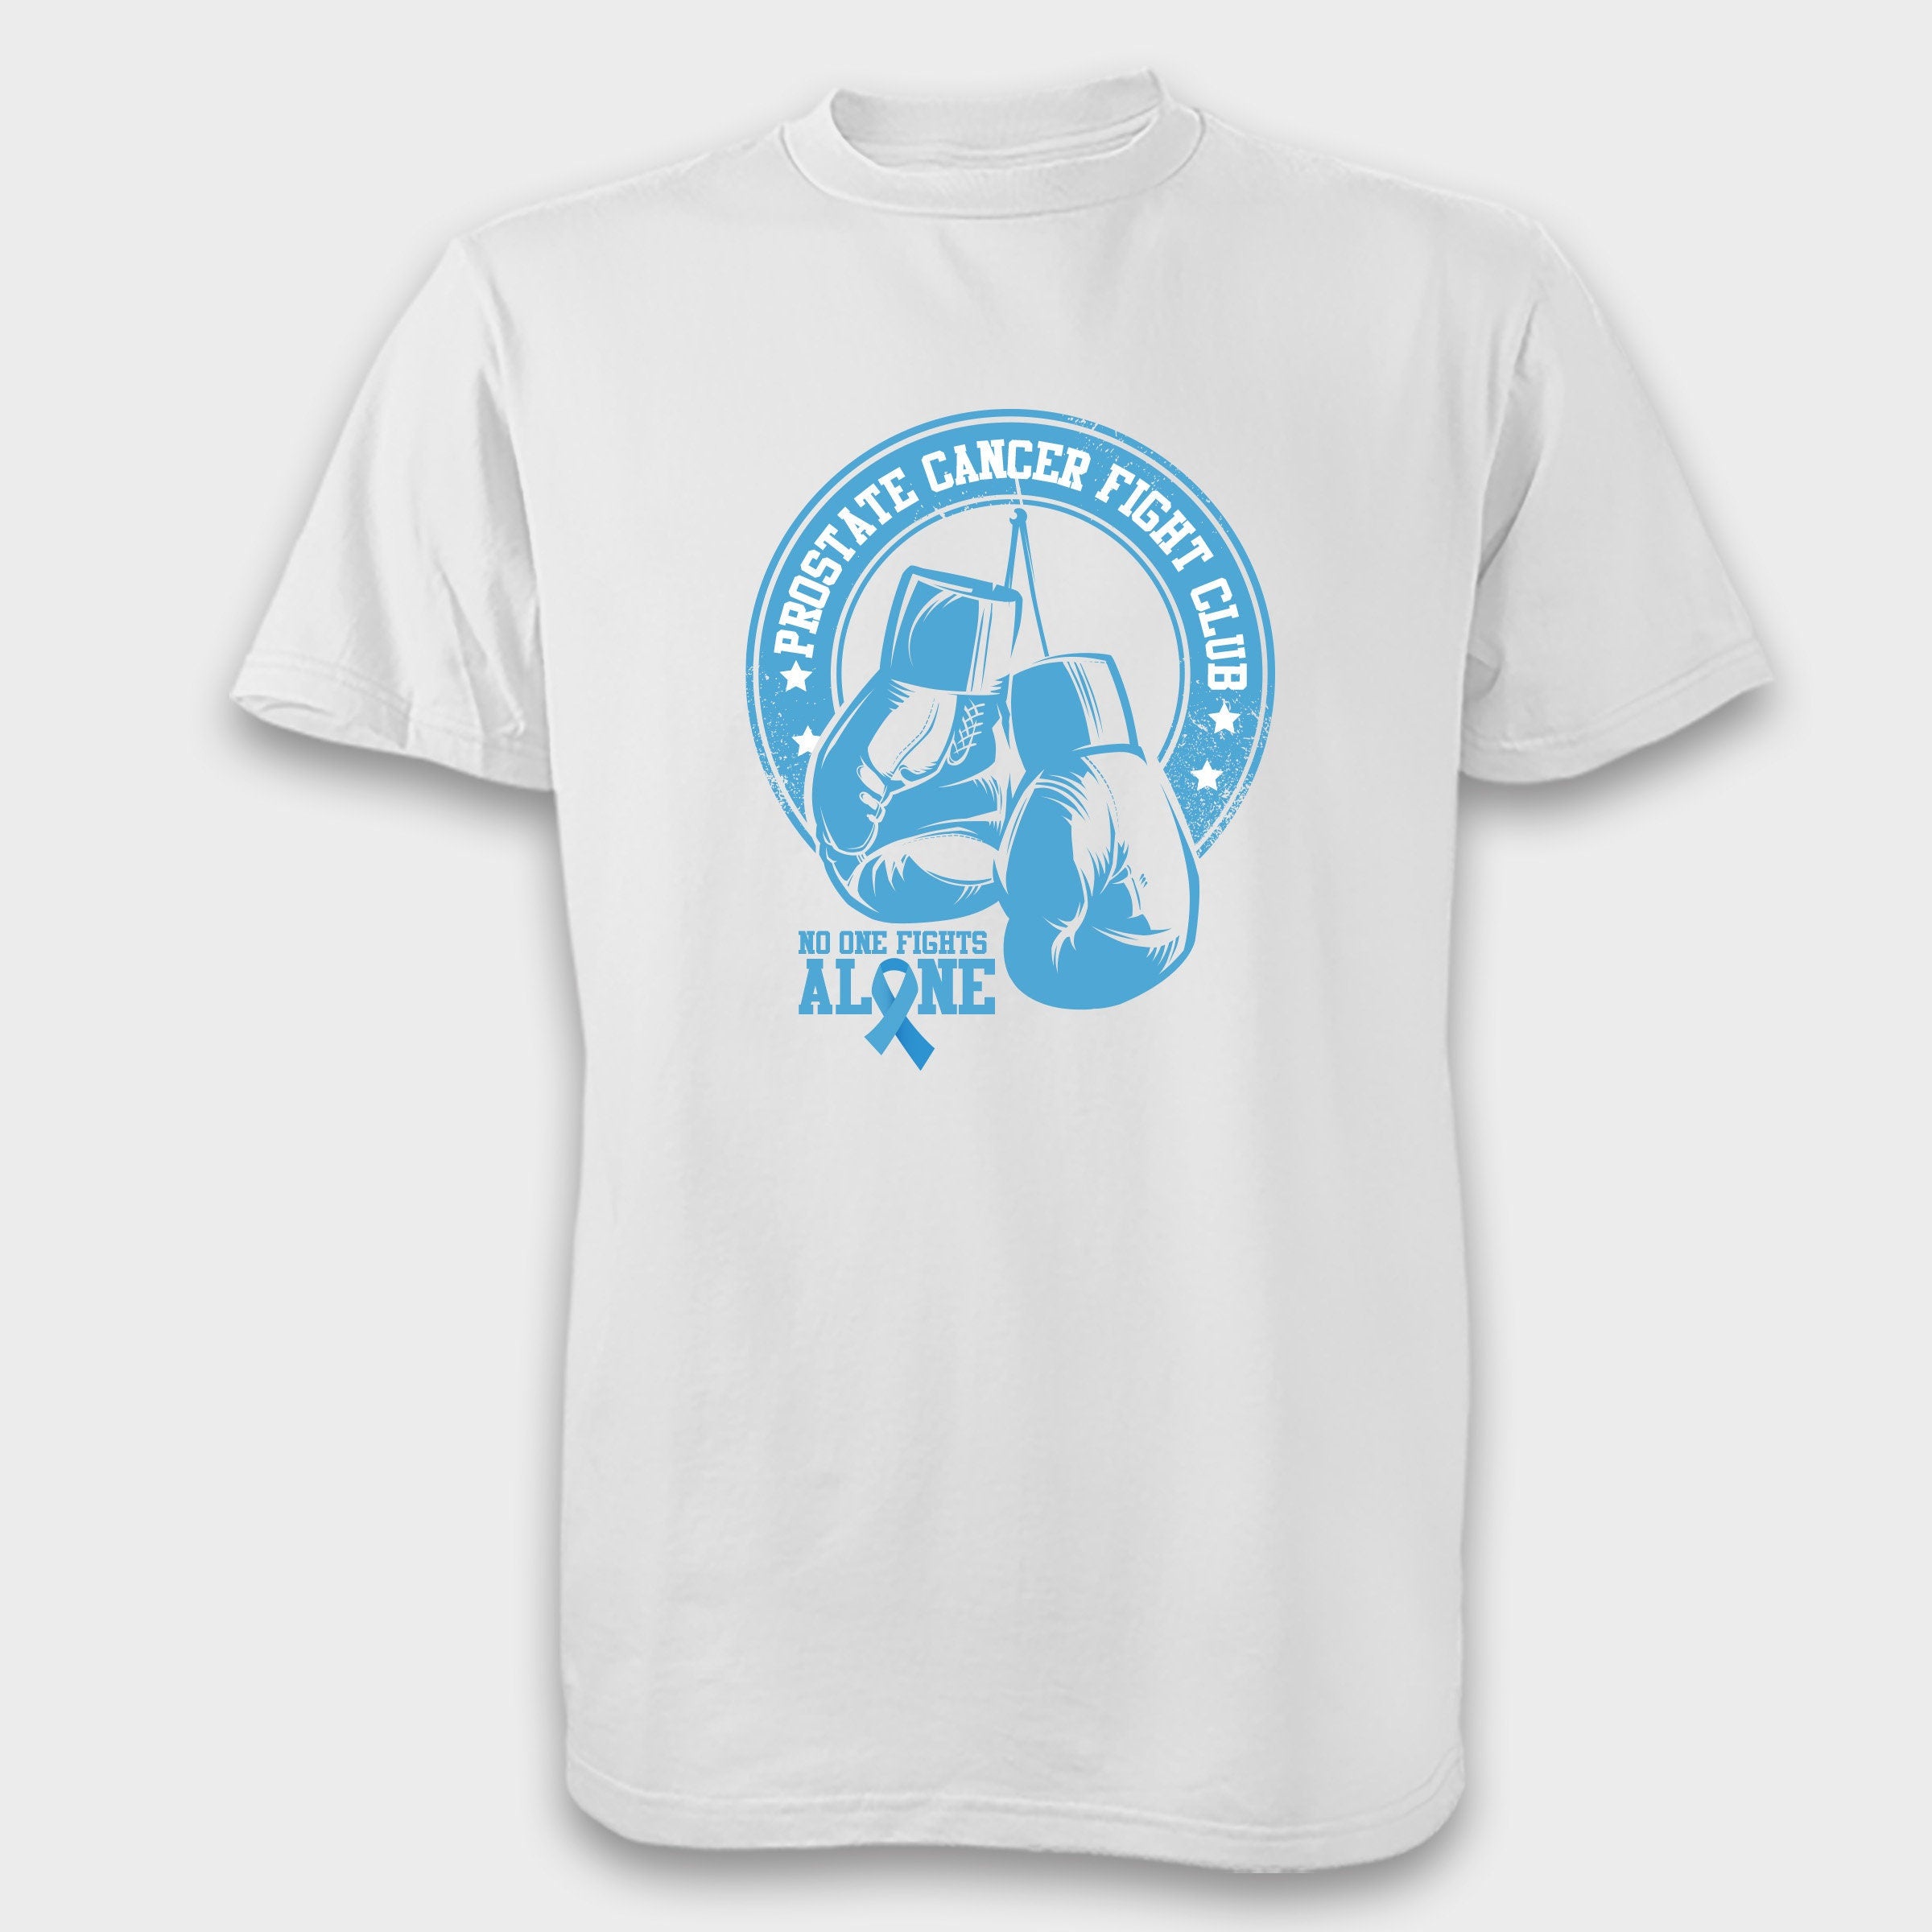 Prostate Cancer Fight Club - Tee